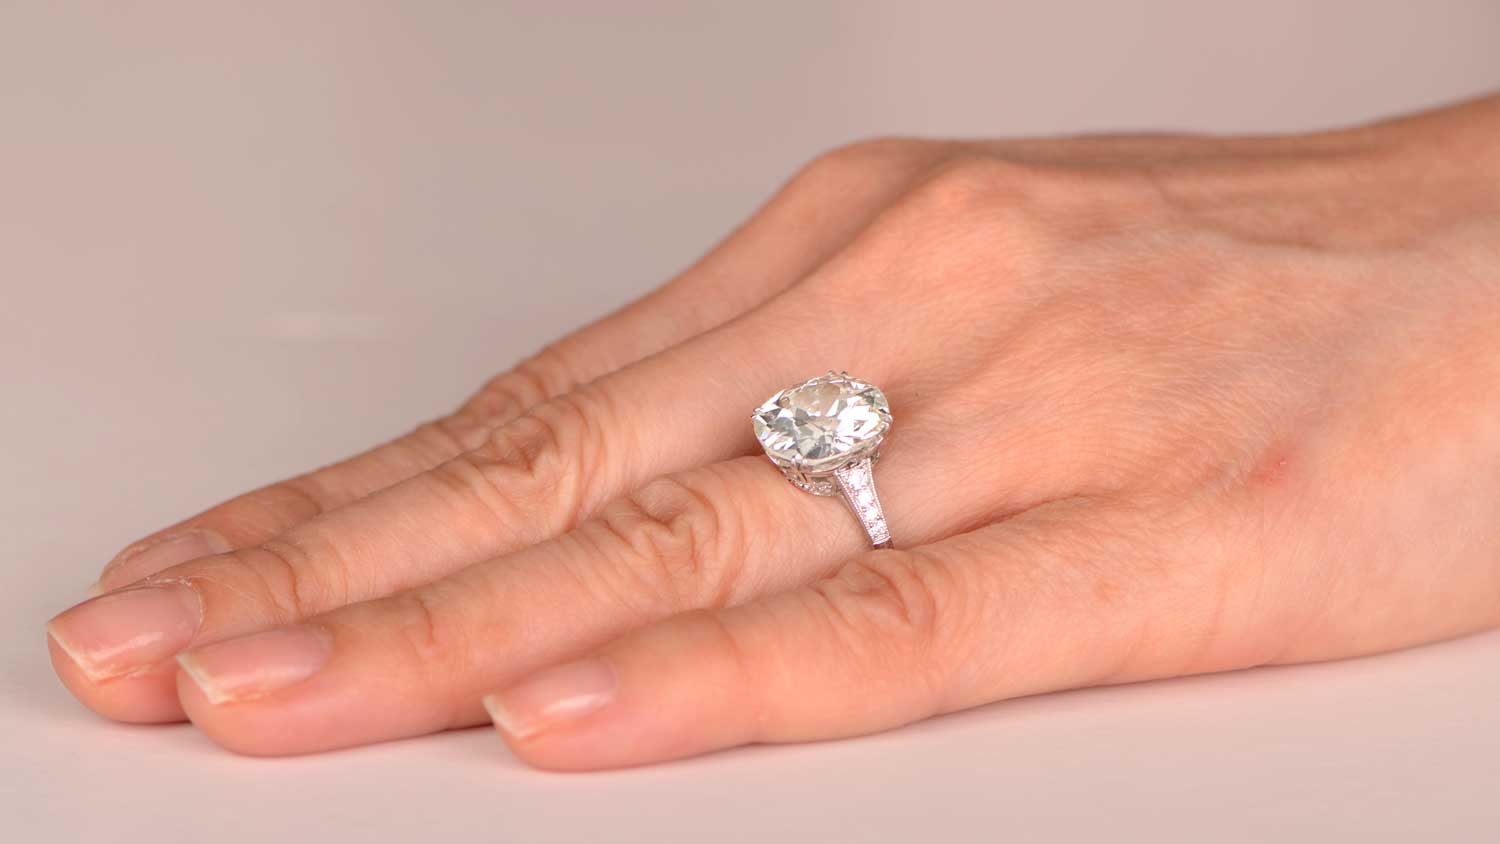 How To Find A Carat Diamond Ring That Is 5 Carat or Greater